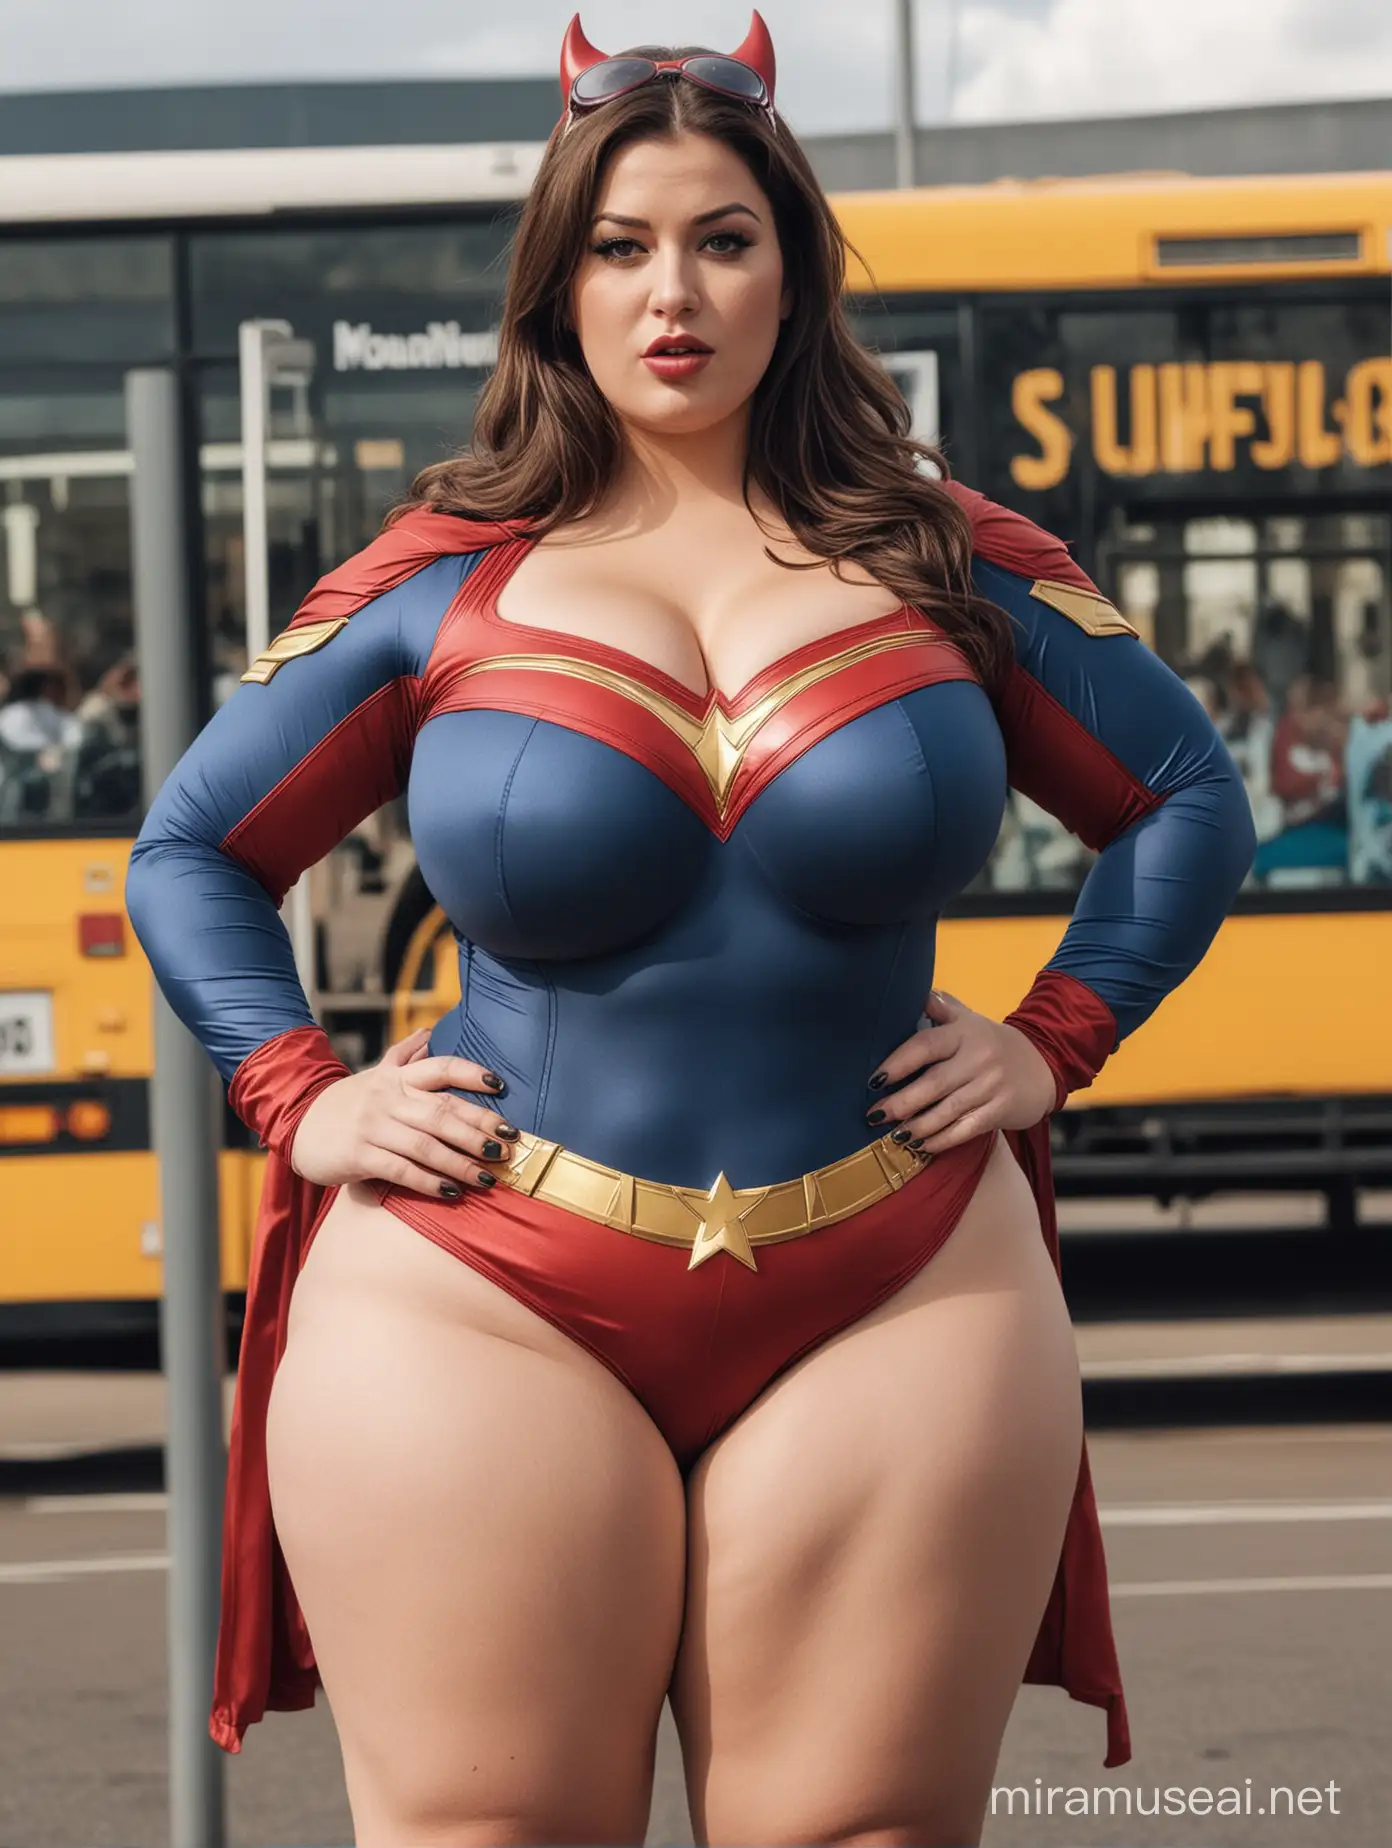 fat curvy woman with outsize boobs, wearing a superhero costume, standing at a bus station